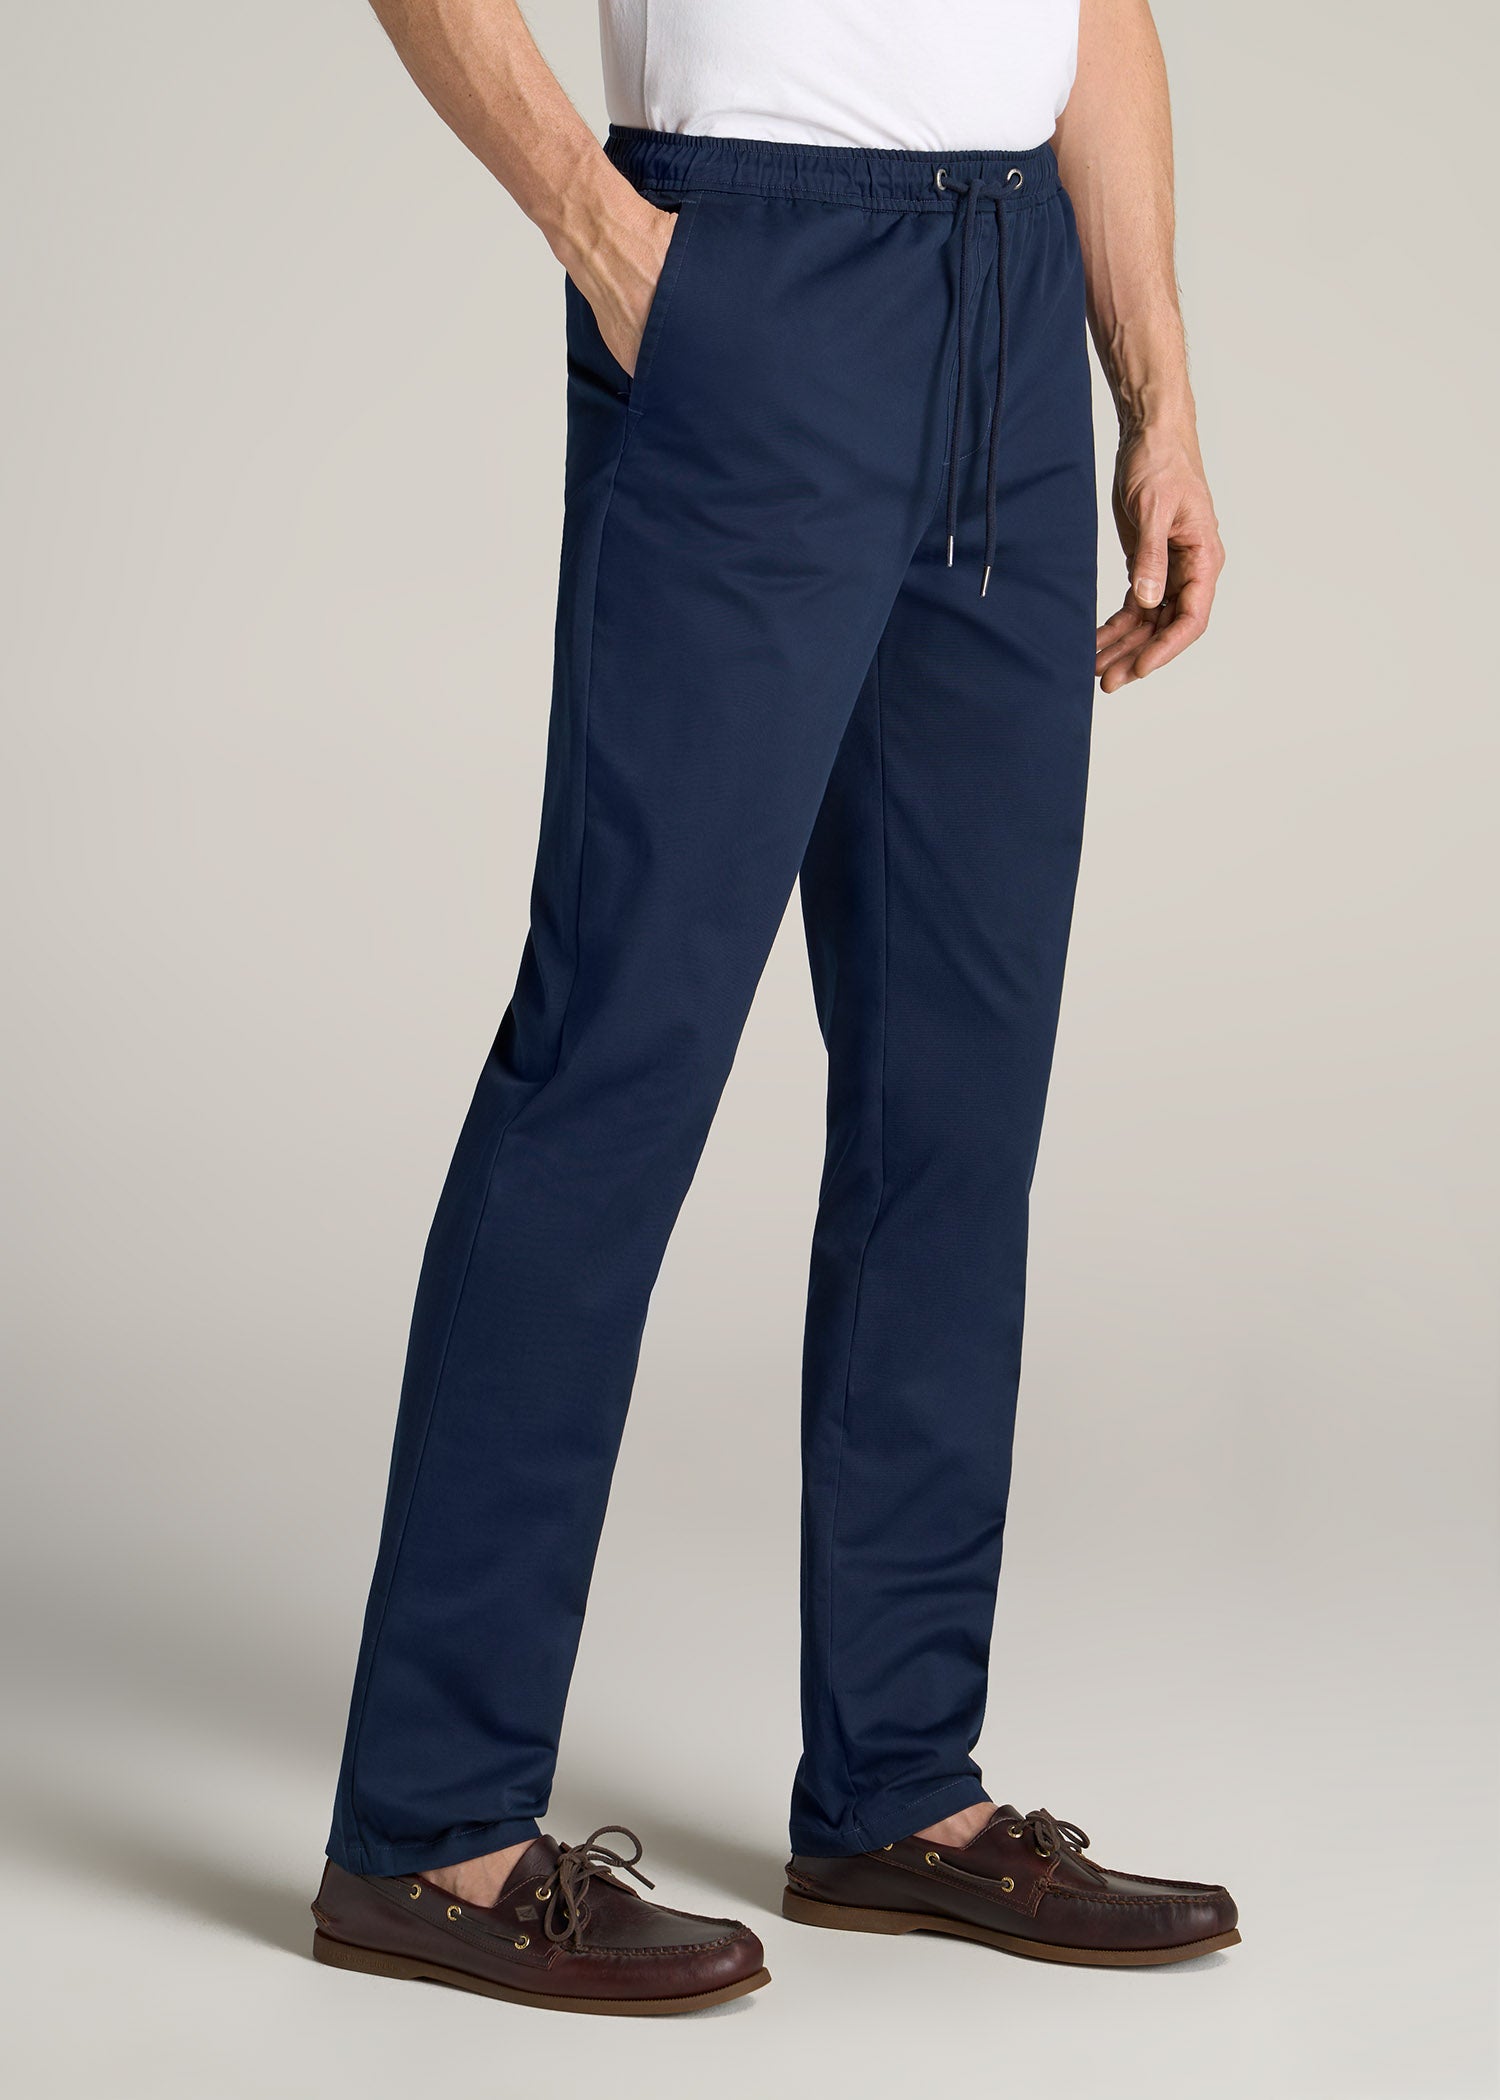 American-Tall-Men-Pull-On-Deck-Stretch-Pants-Navy-side